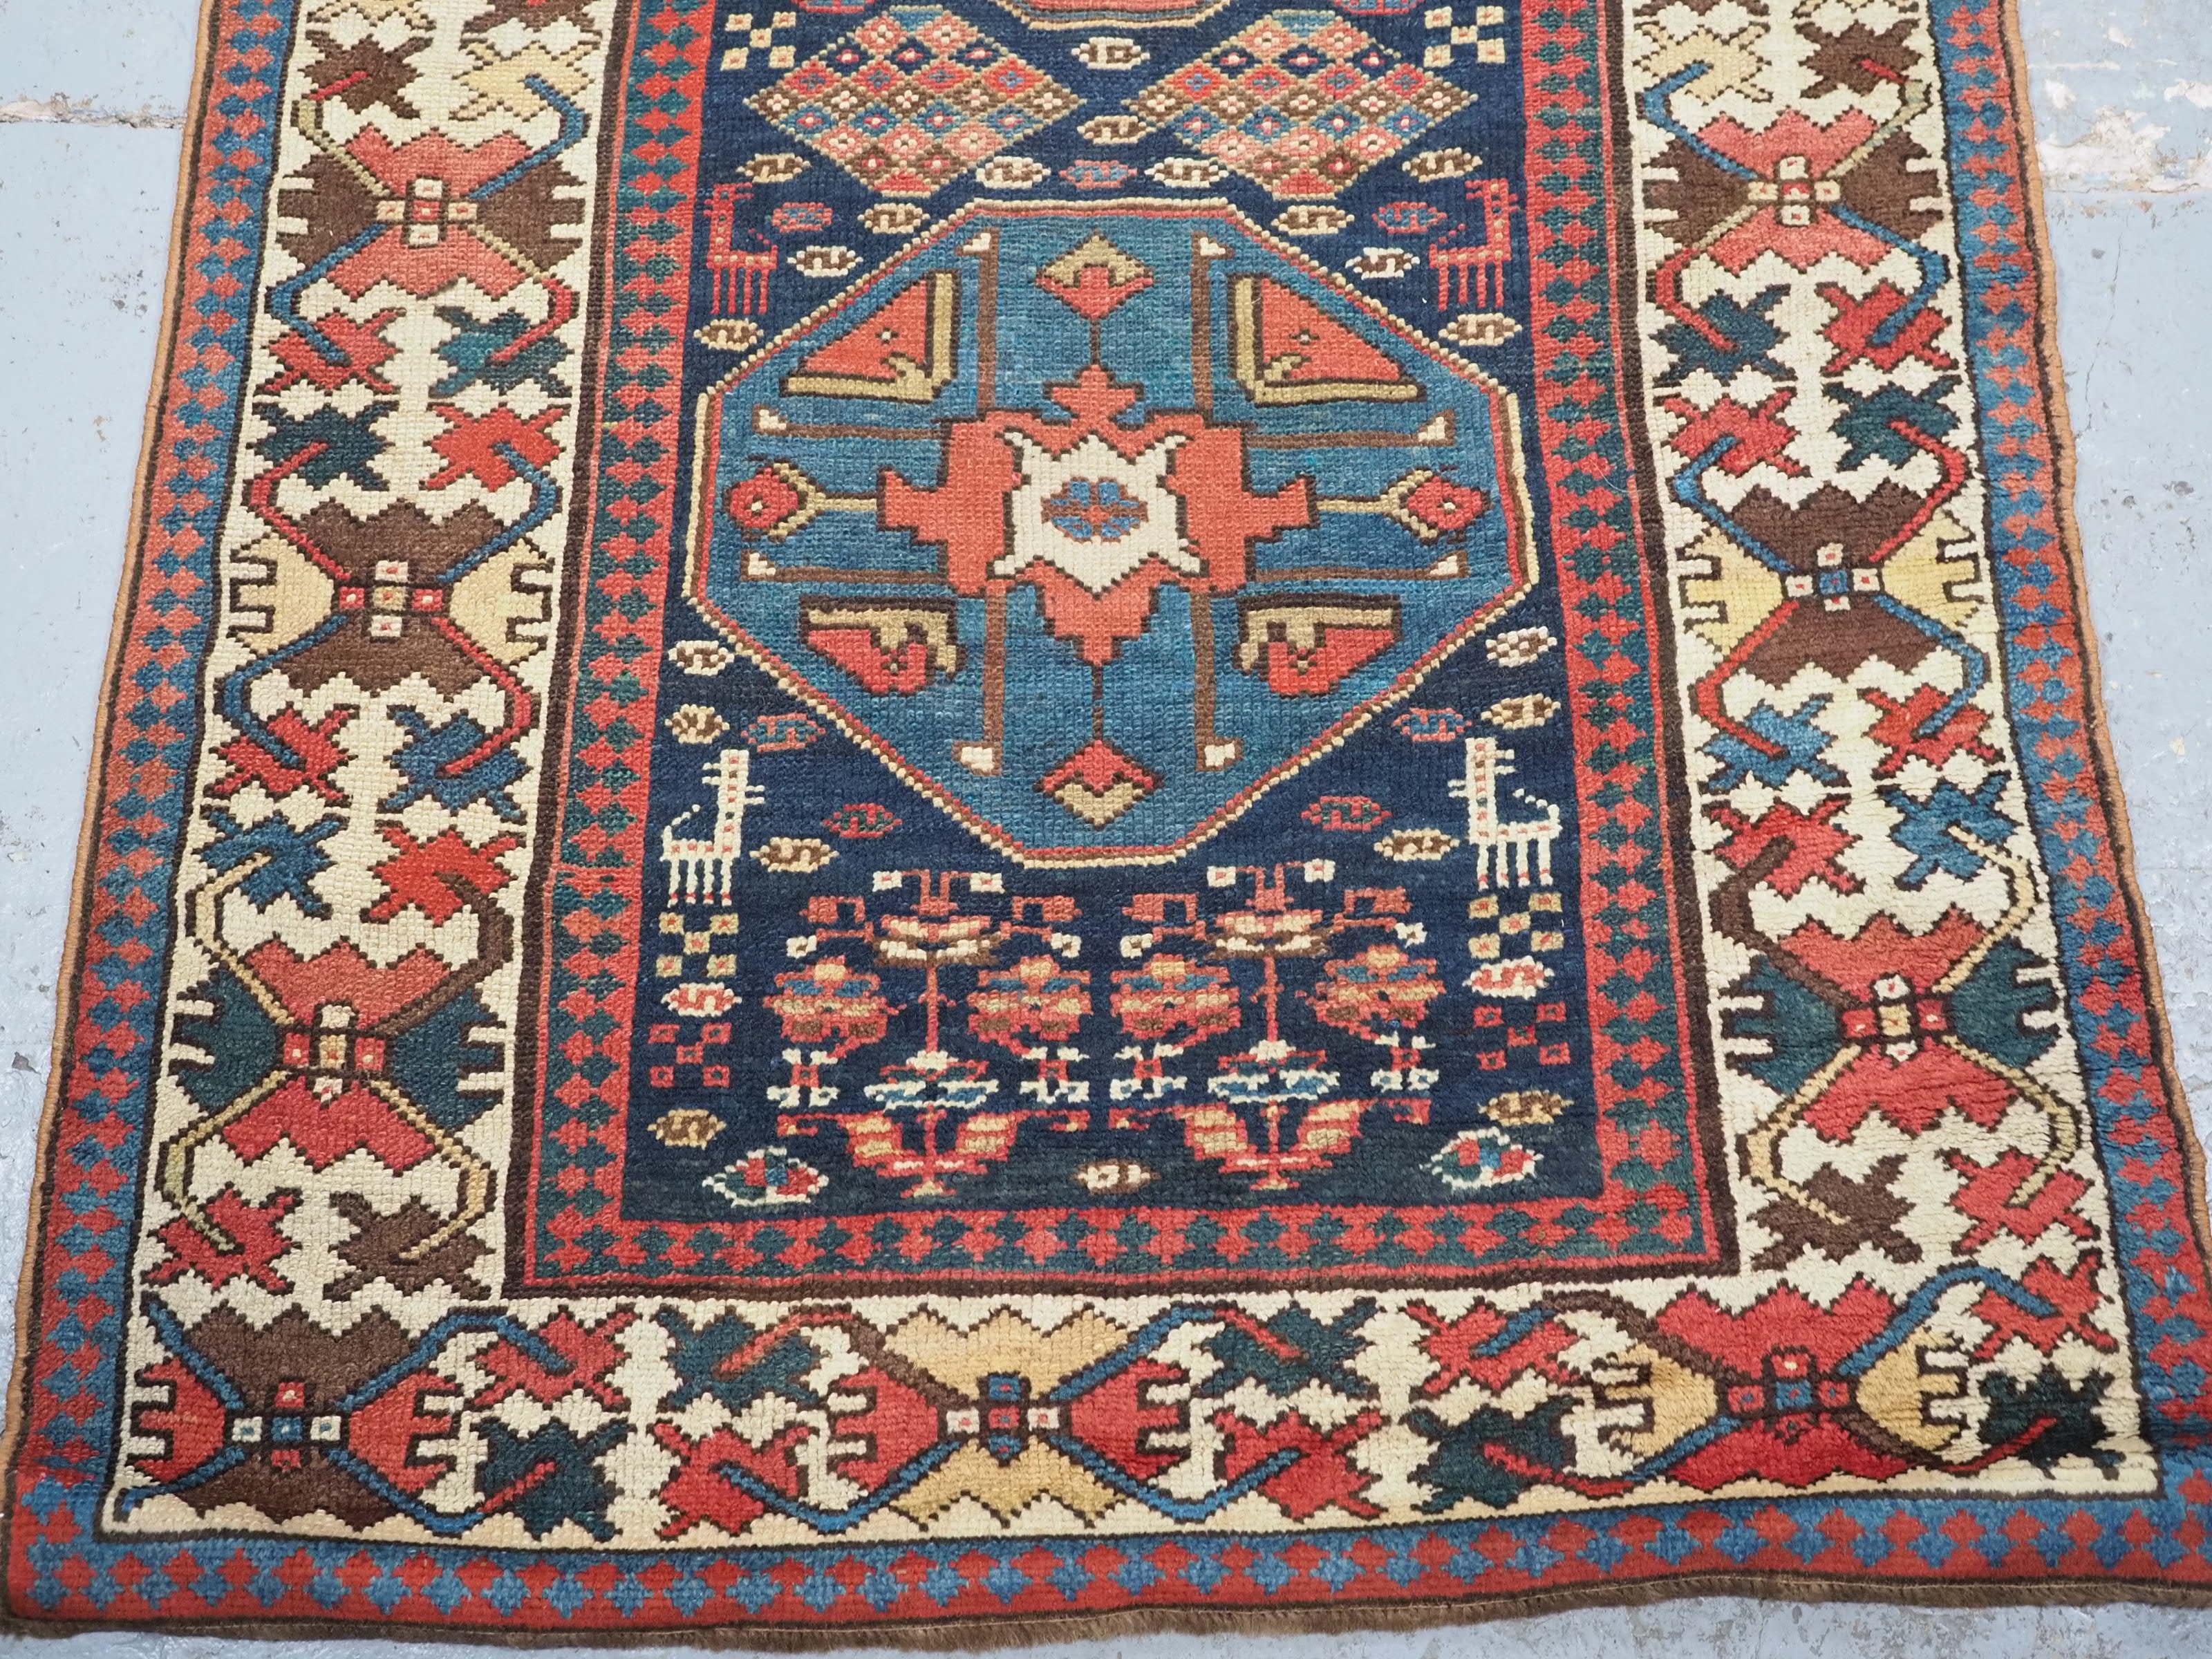 Wool Antique south Caucasian or Kurdish runner of superb design and colour. For Sale